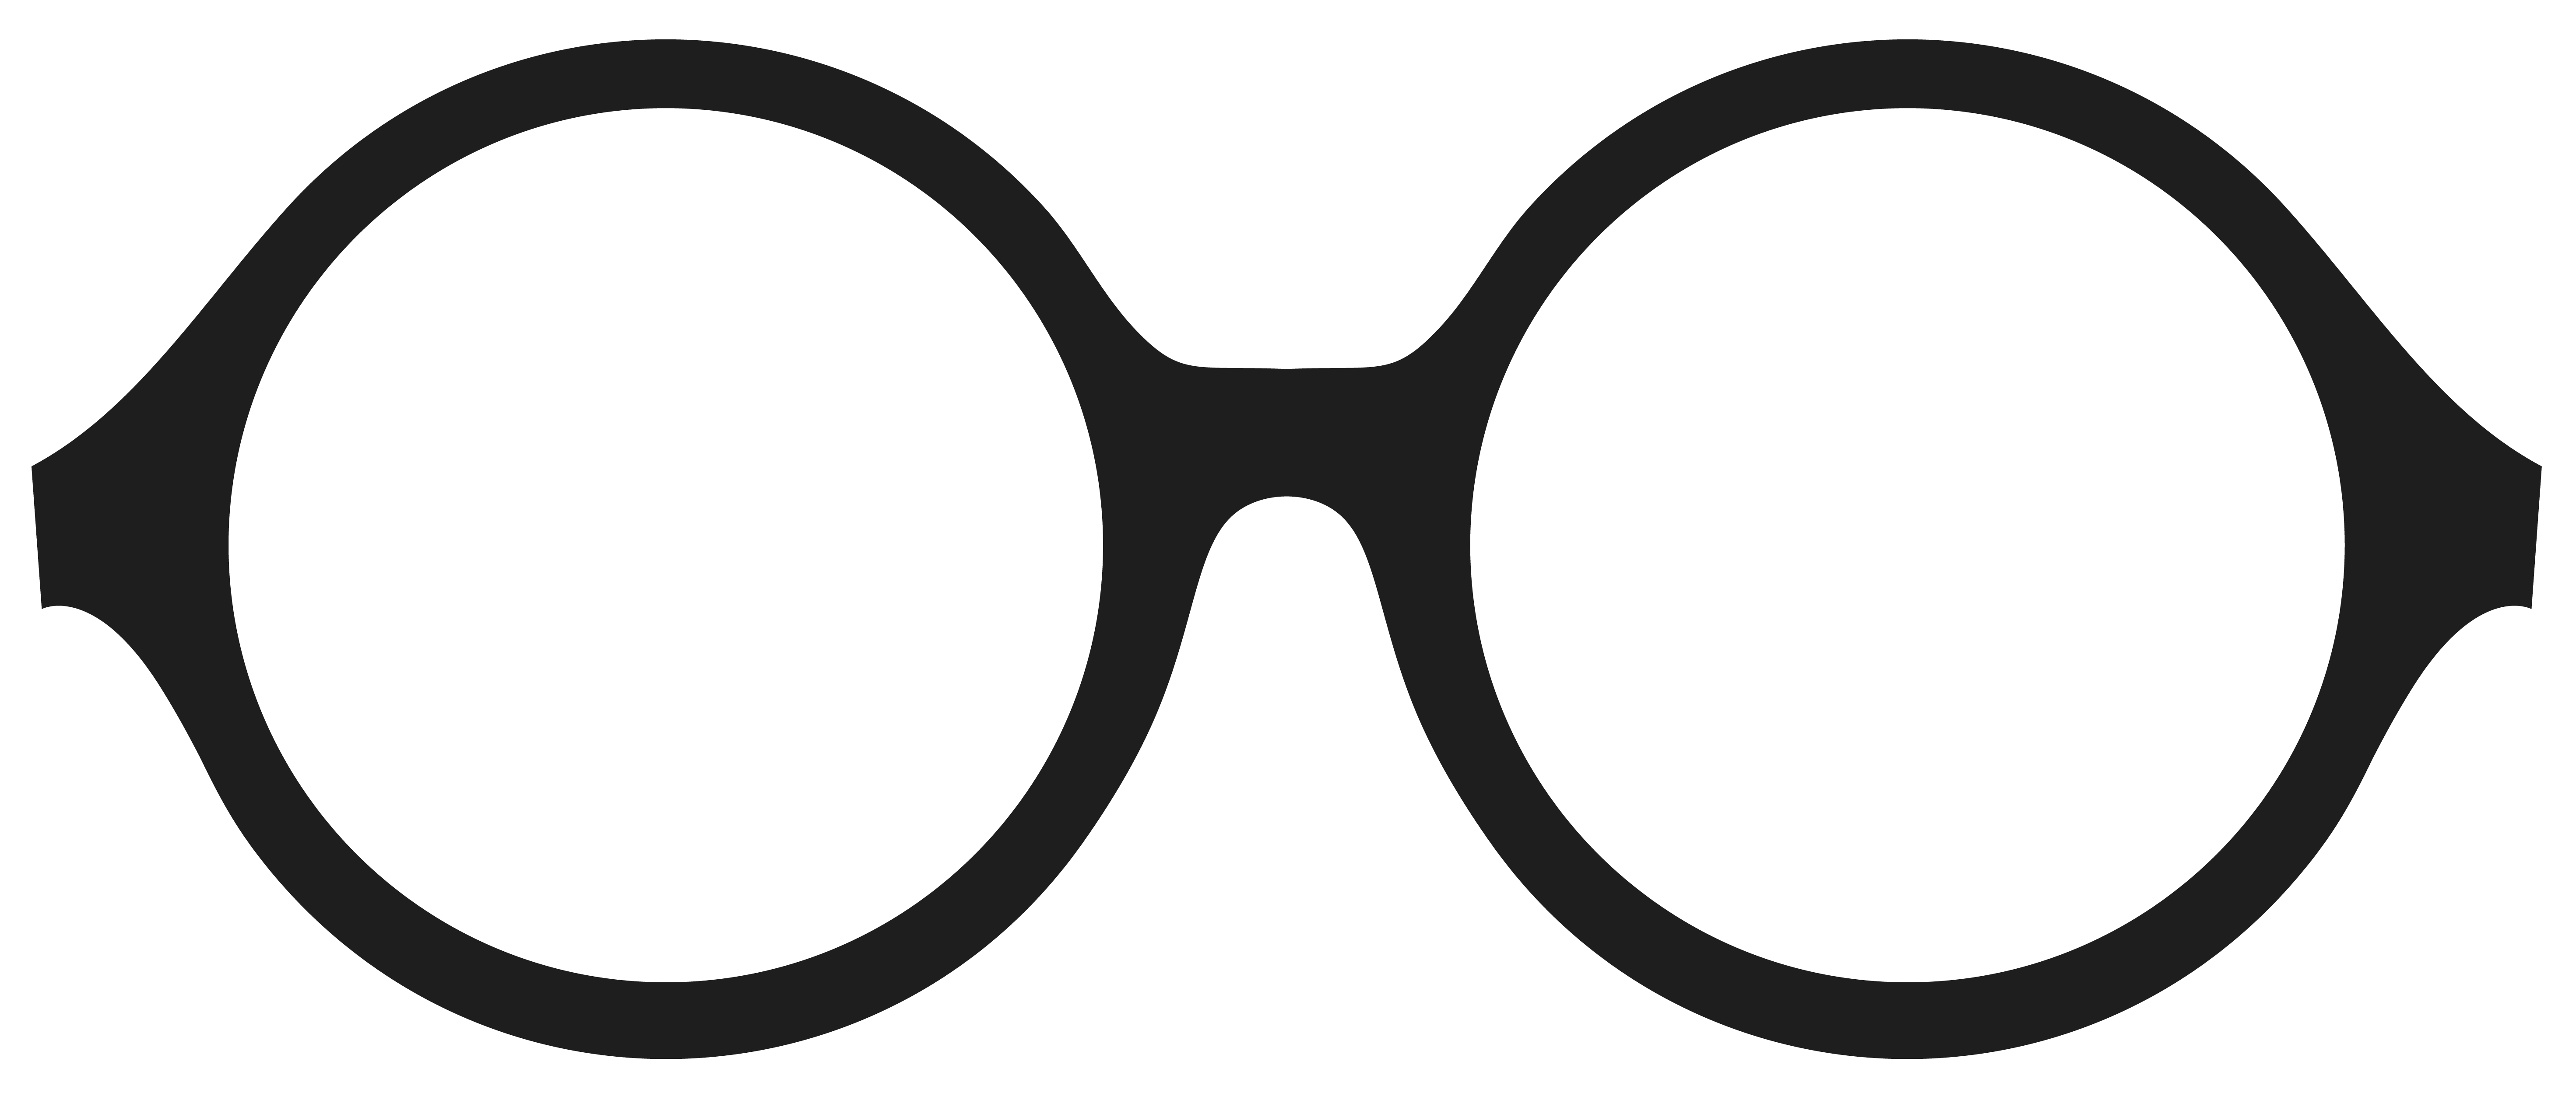 Glasses png images free. Glass clipart optical